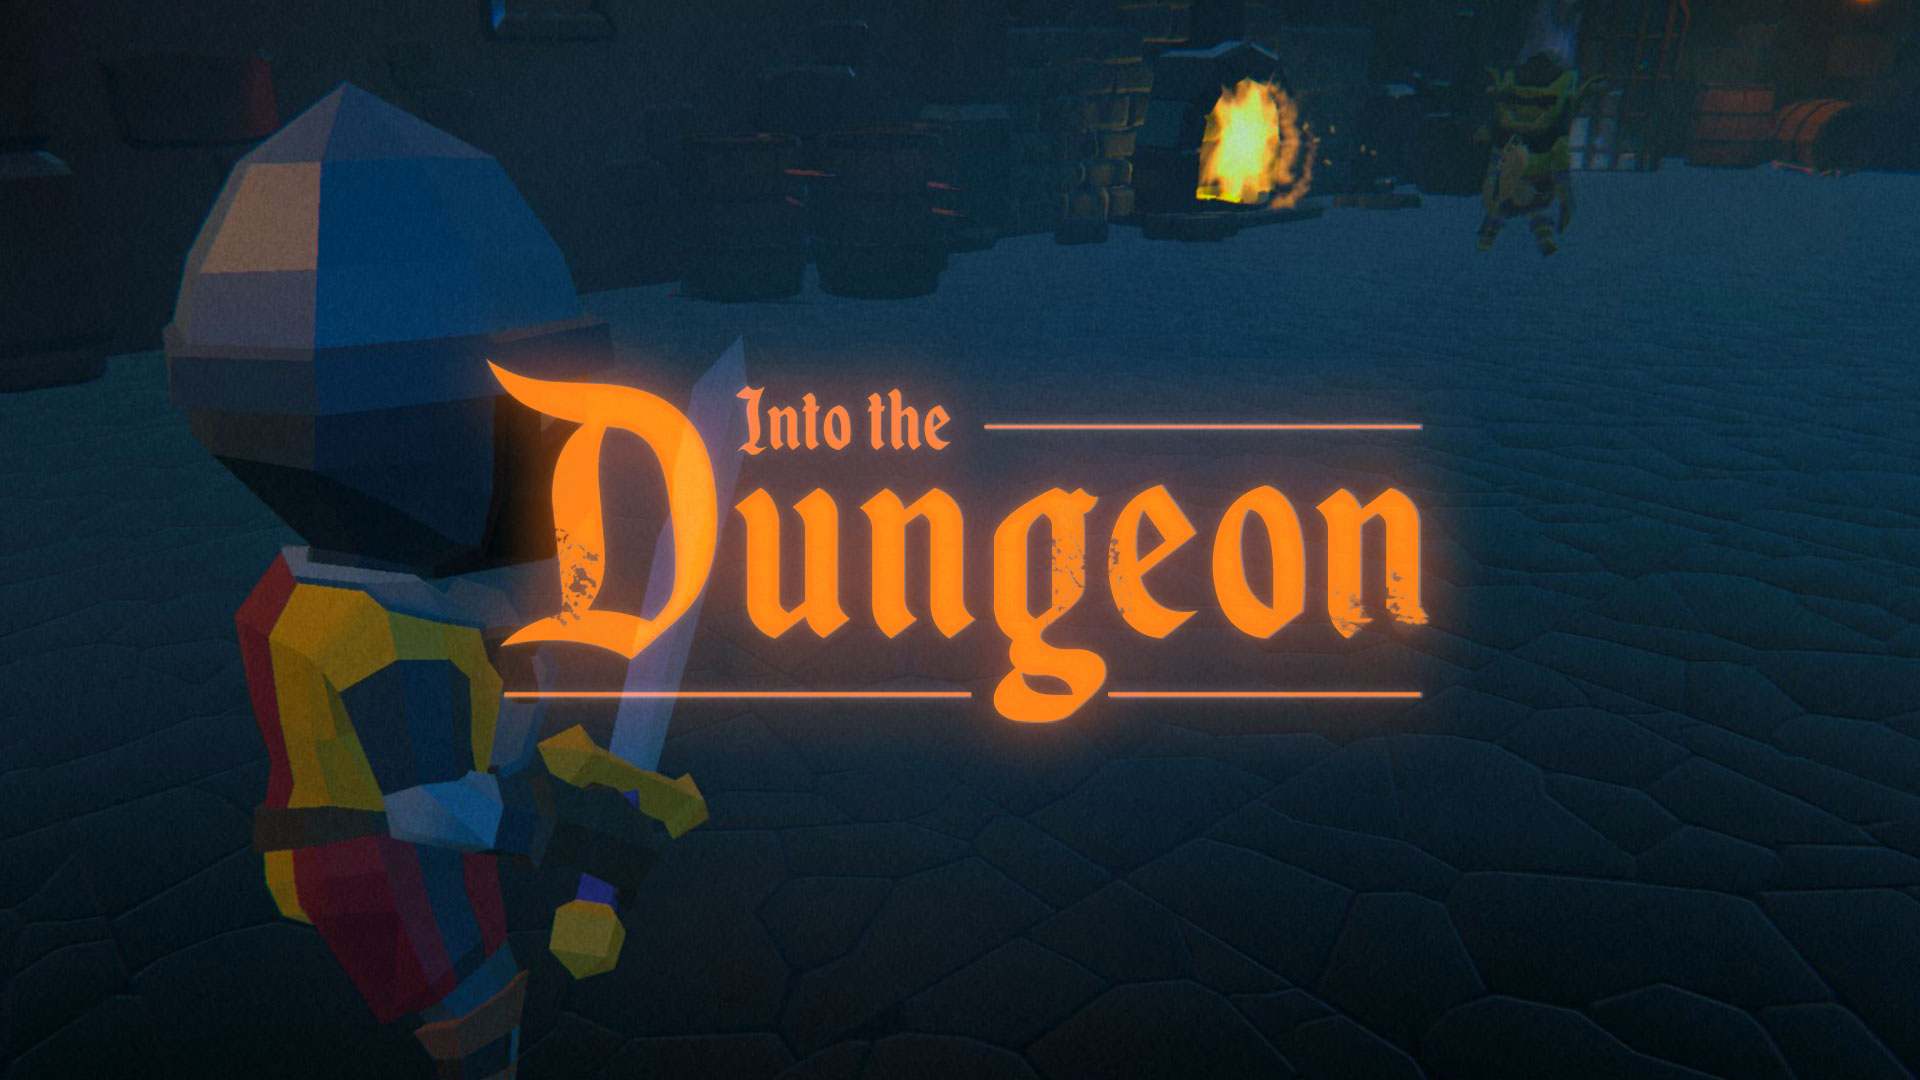 Into the dungeon